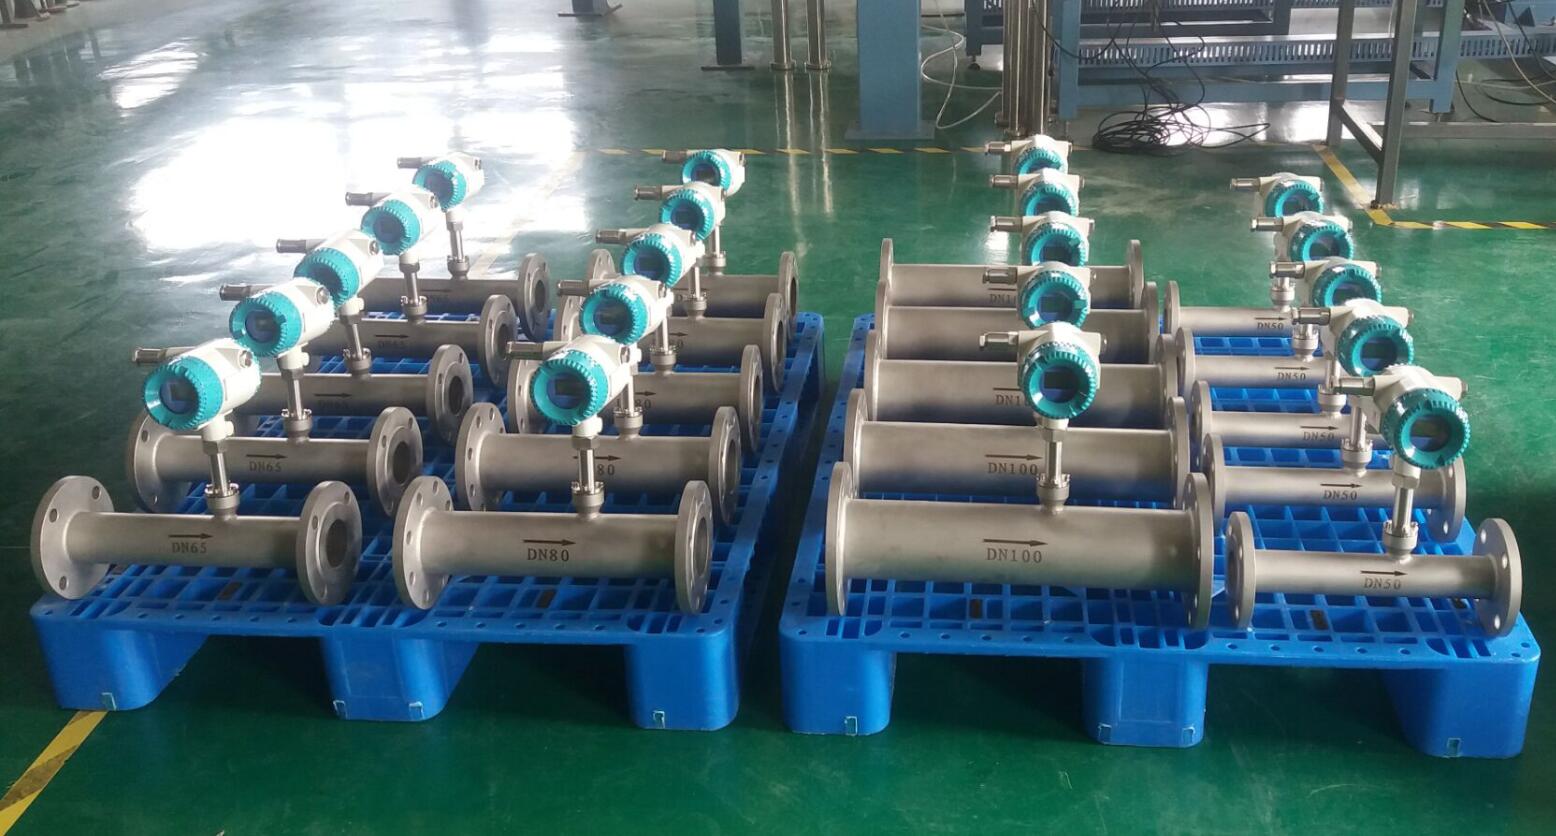 Big order thermal mass flowmeter ready for shipping.